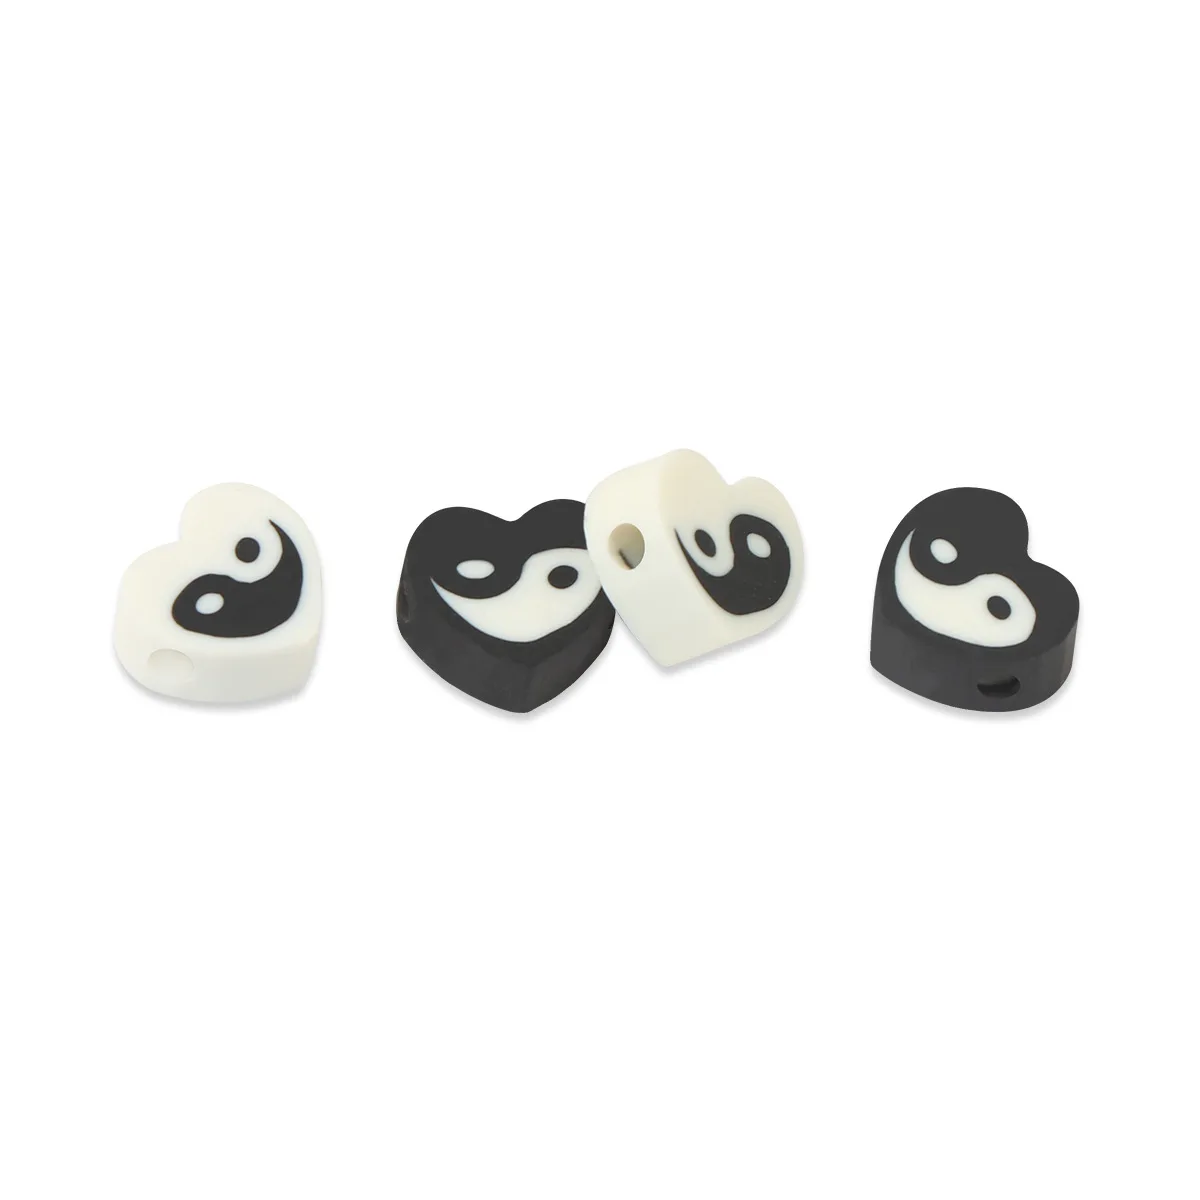 20pcs/50pcs/100pcs Black & White Mixed Color Heart Gossip Clay Bead For  Jewelry Making DIY Bracelet Necklace Earring Accessories - AliExpress